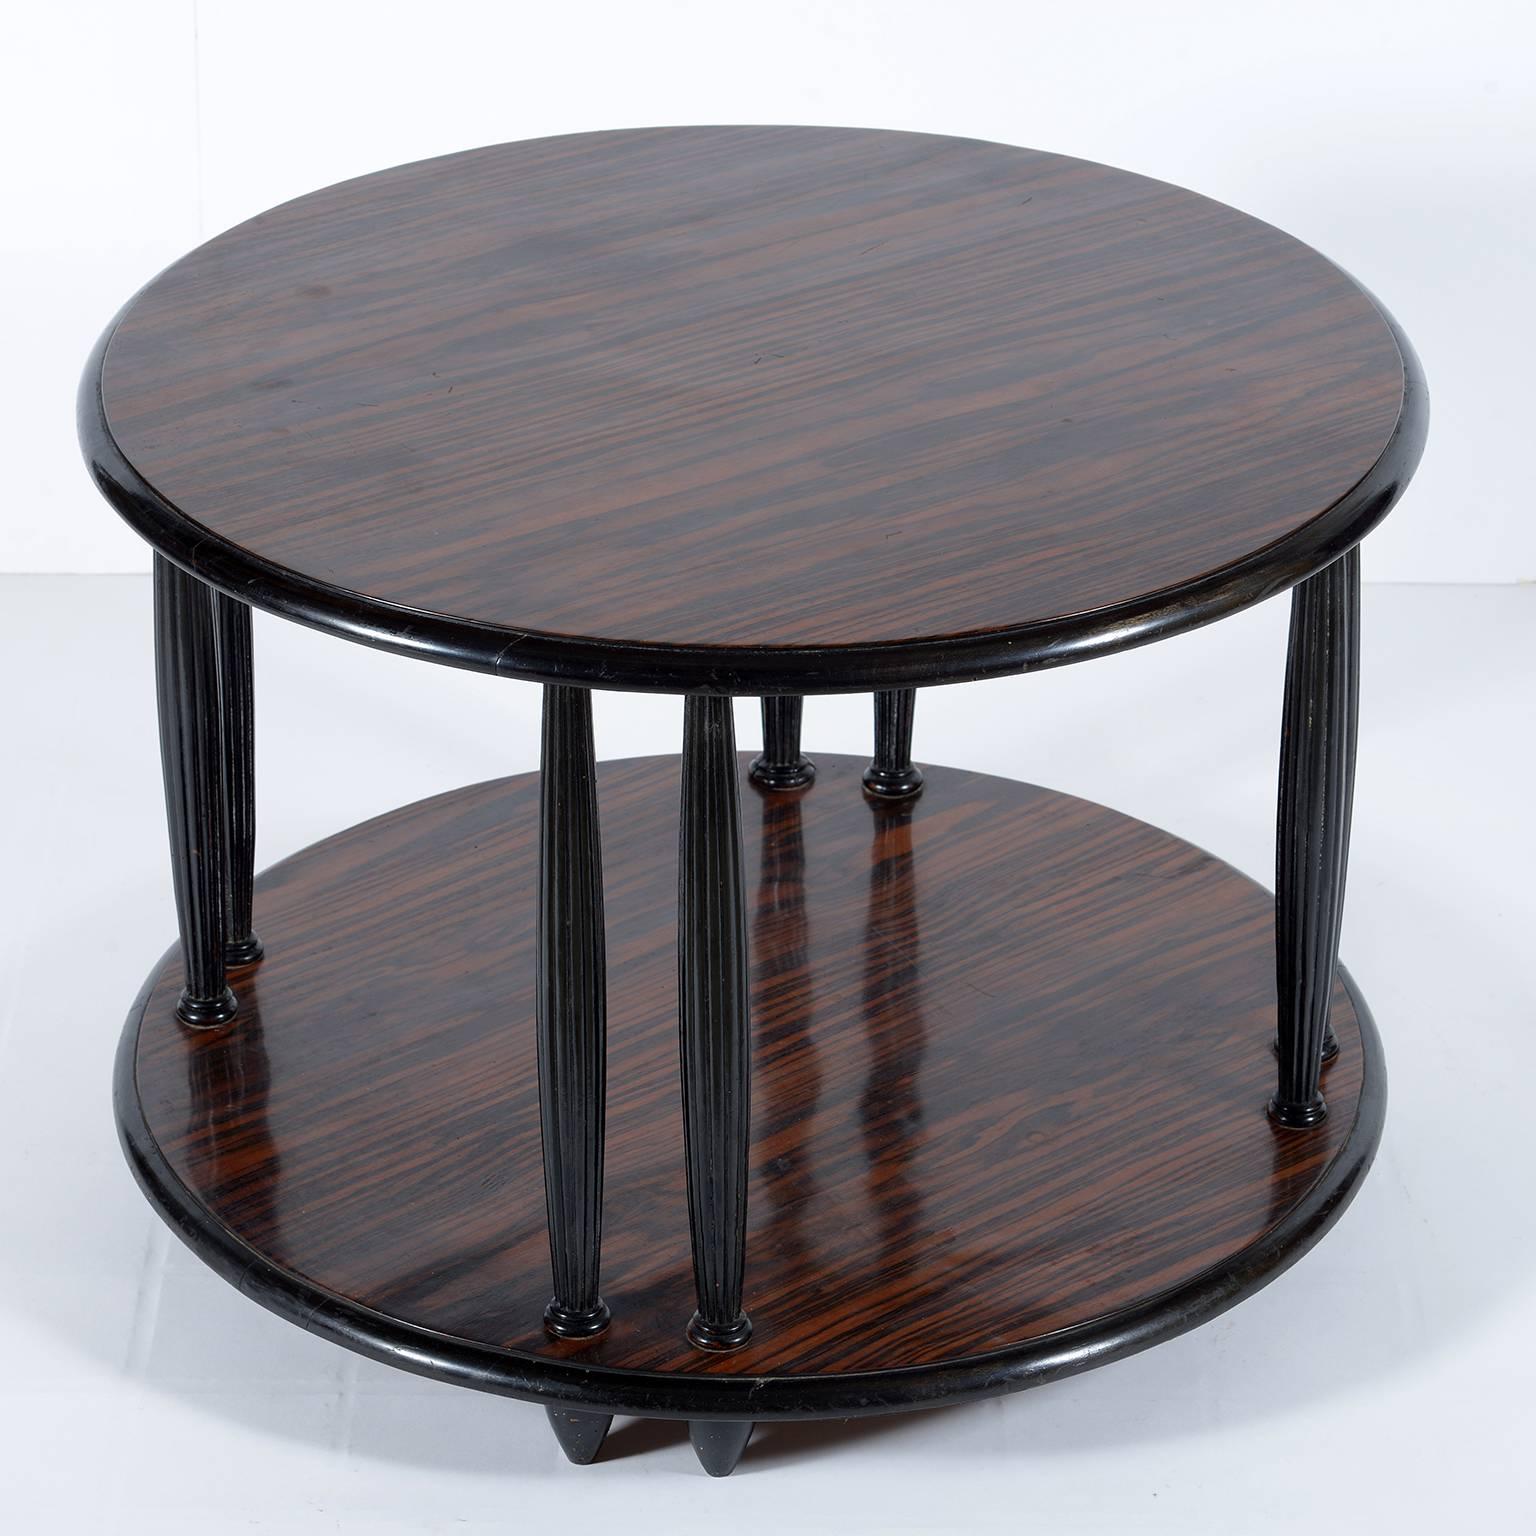 Italian Round  Double Shelves Art Deco Coffee or Side Table, 1925-1930